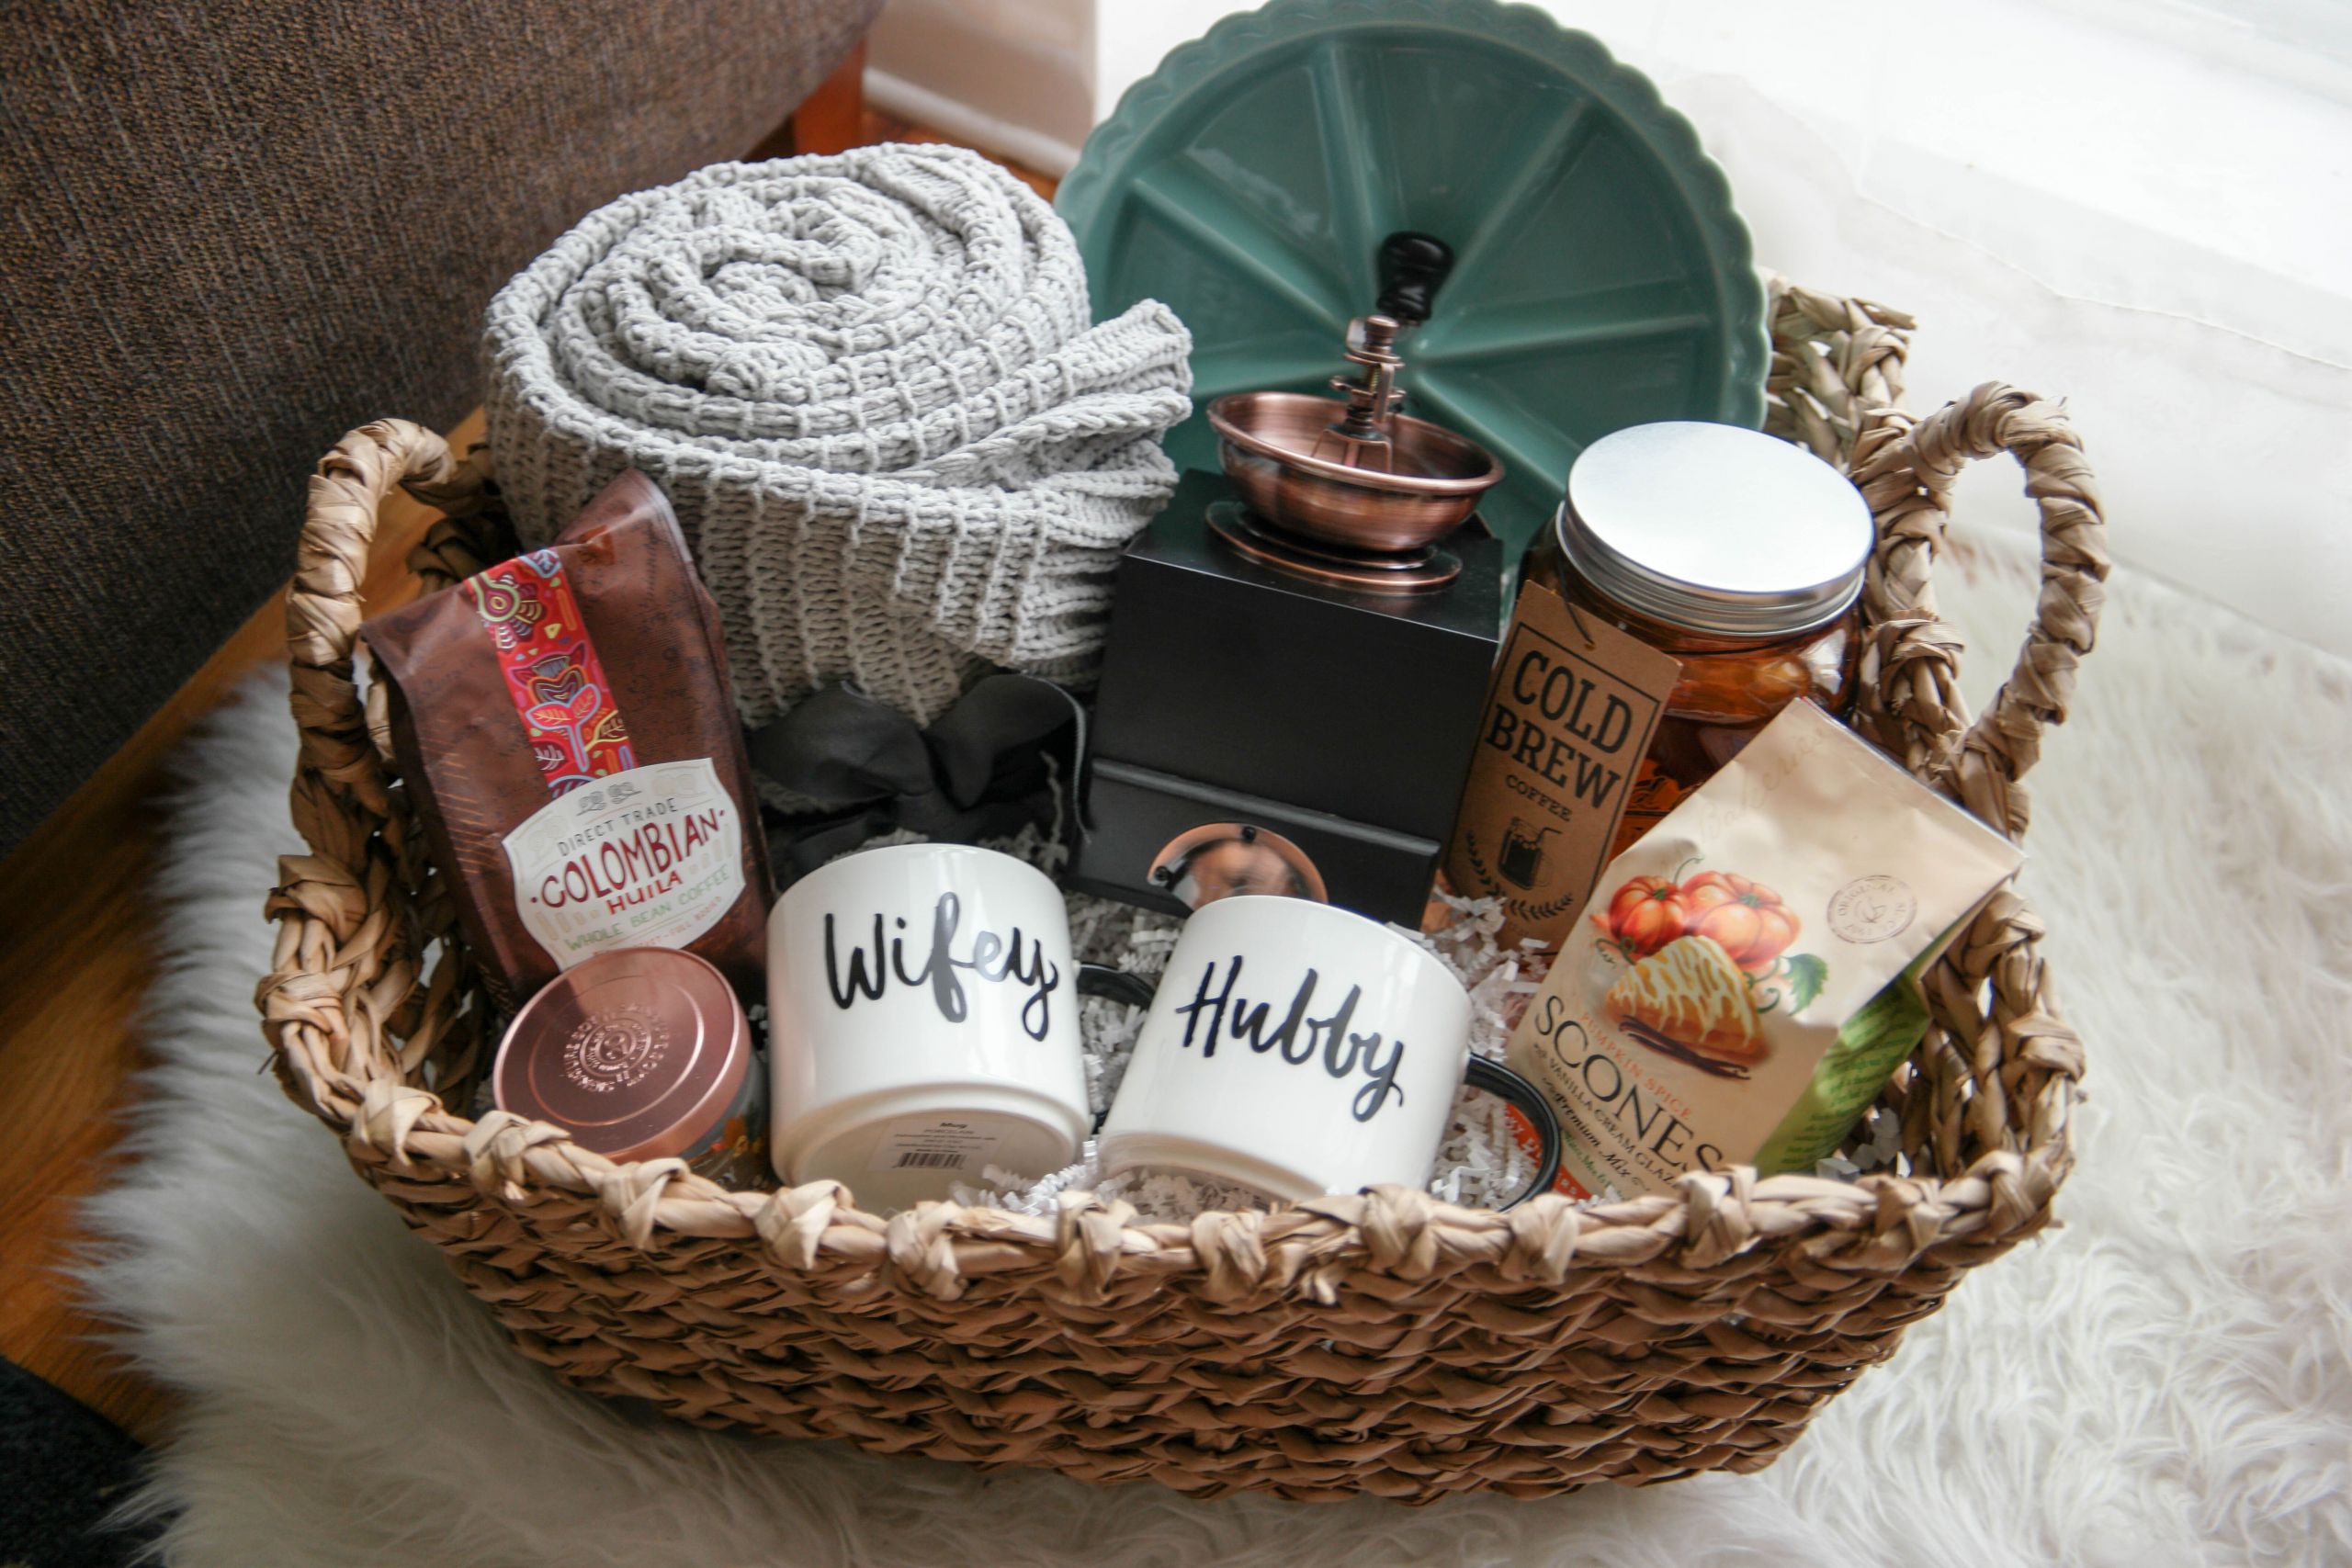 DIY Wedding Gift Baskets
 A Cozy Morning Gift Basket A Perfect Gift For Newlyweds